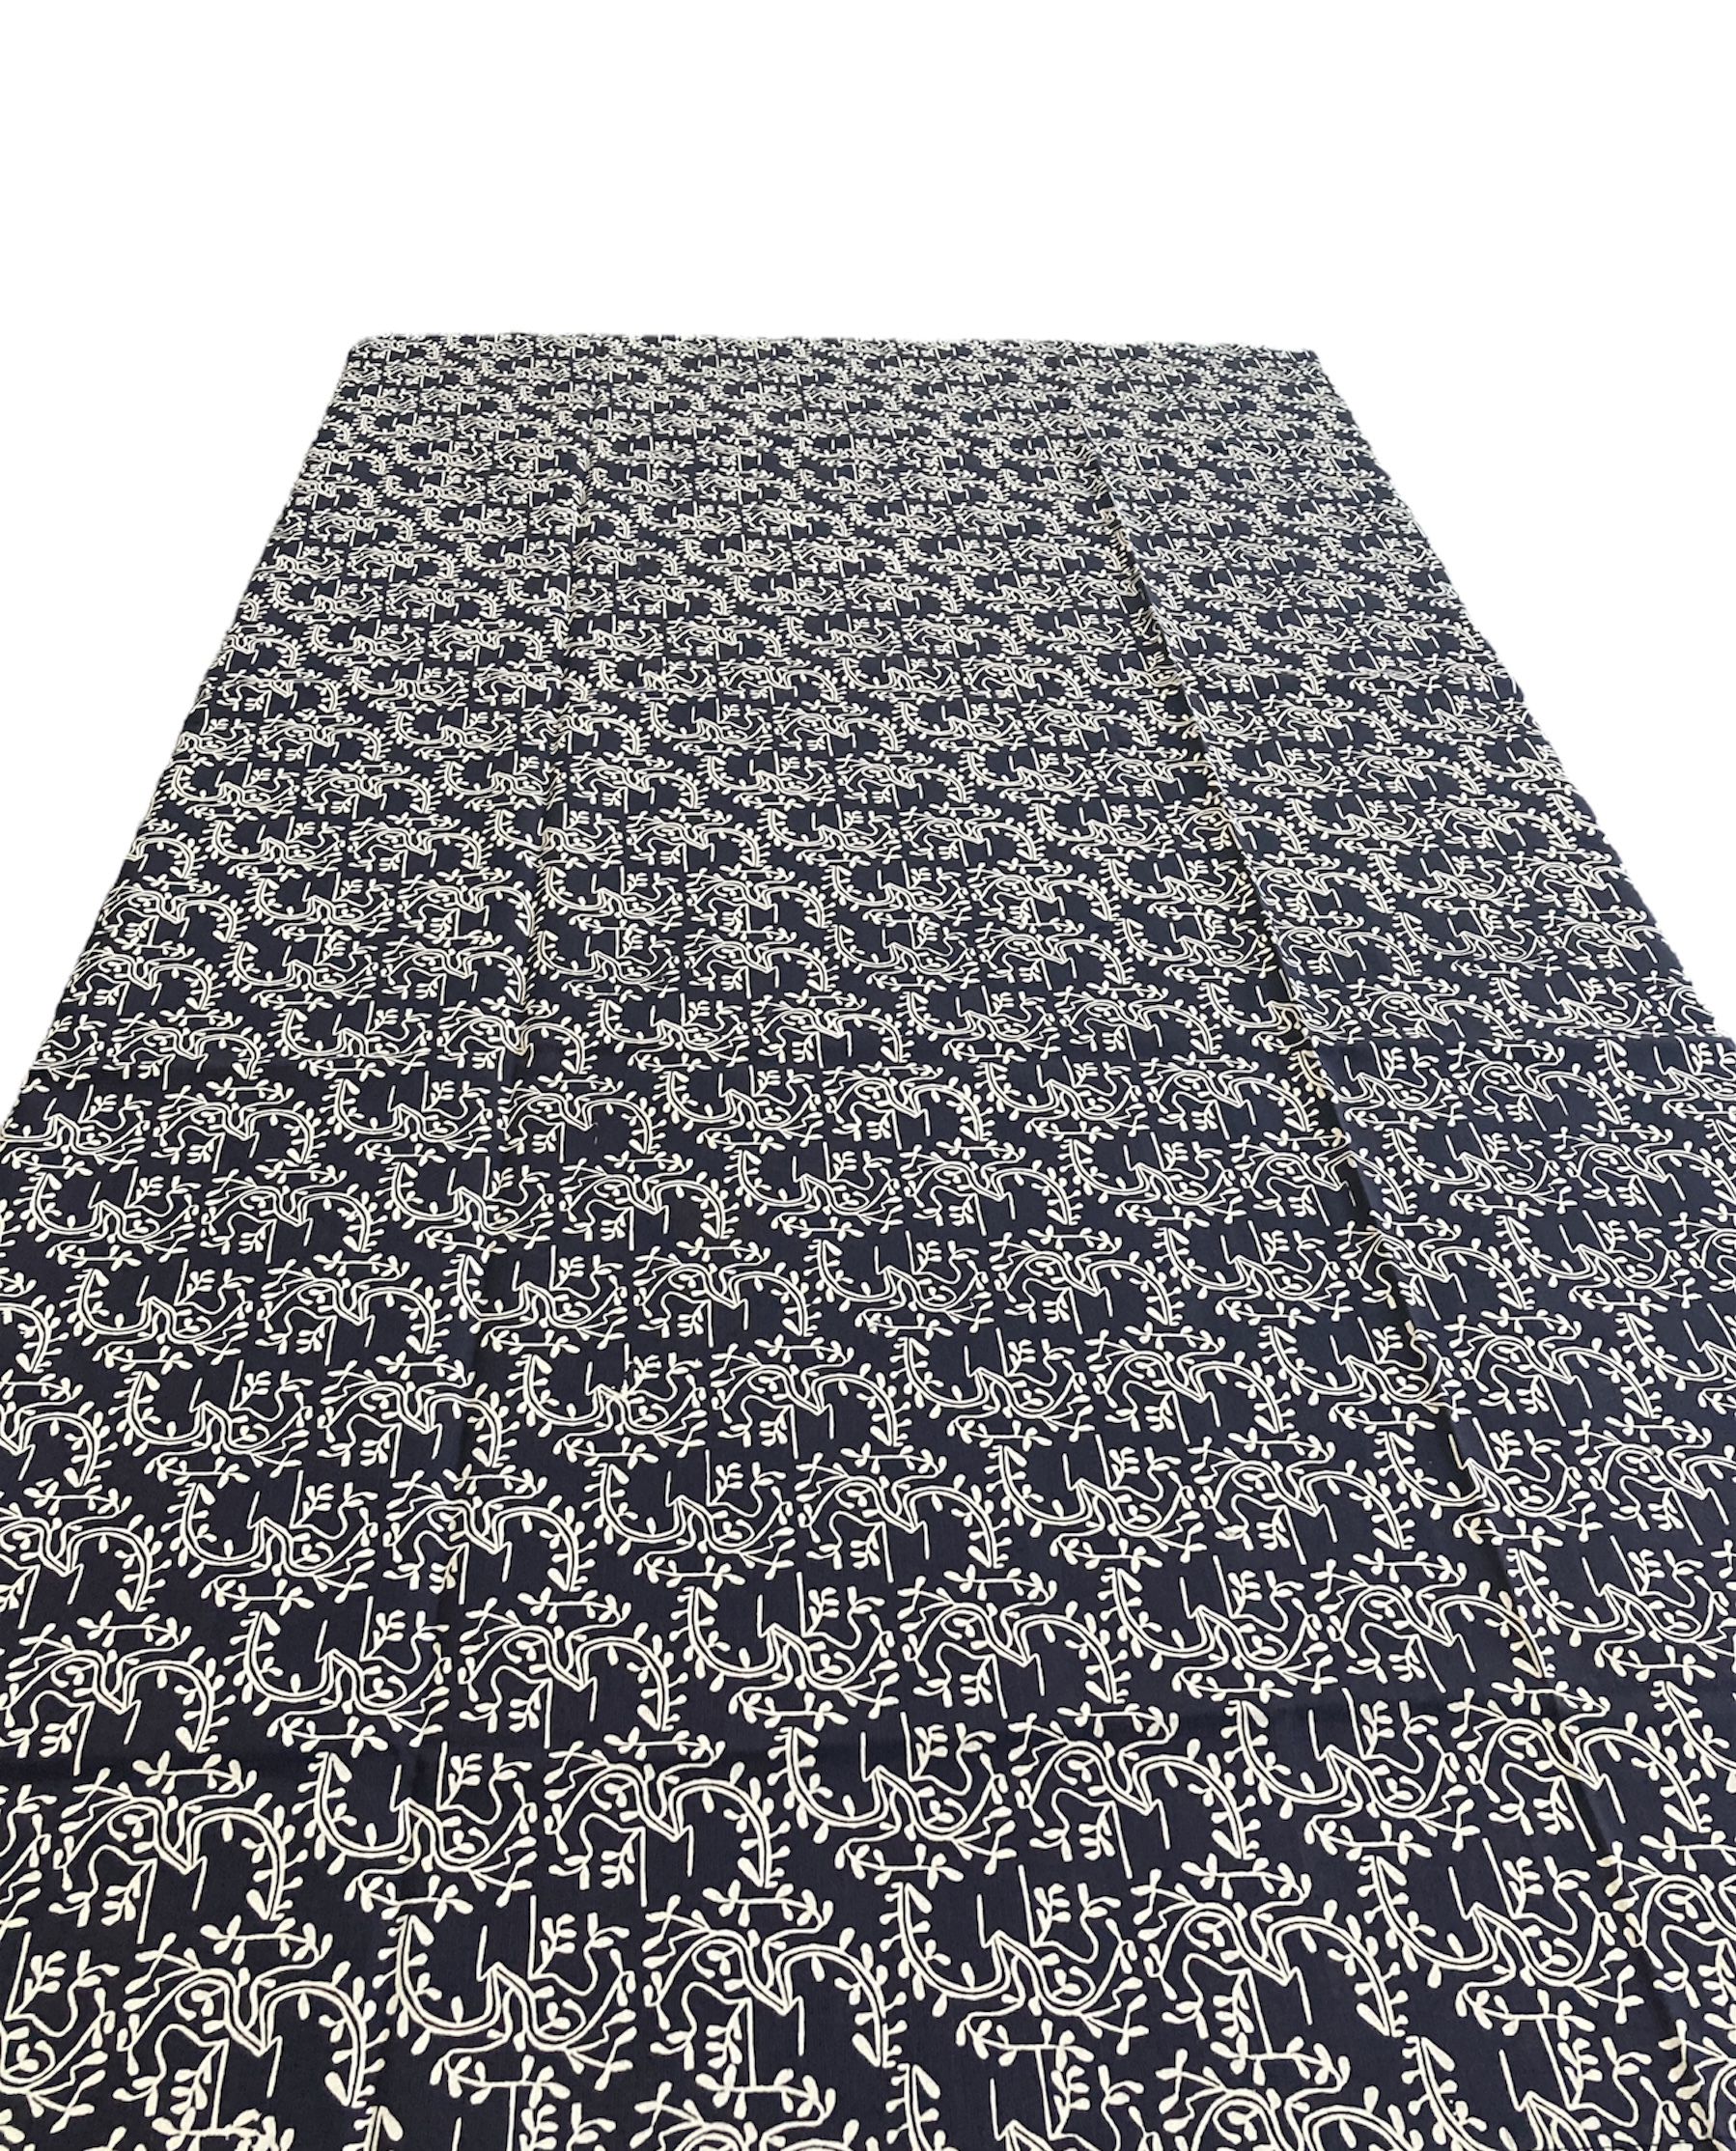 100% cotton Tablecloth approx. 59\" x 57\" from Namibia - # bw12t